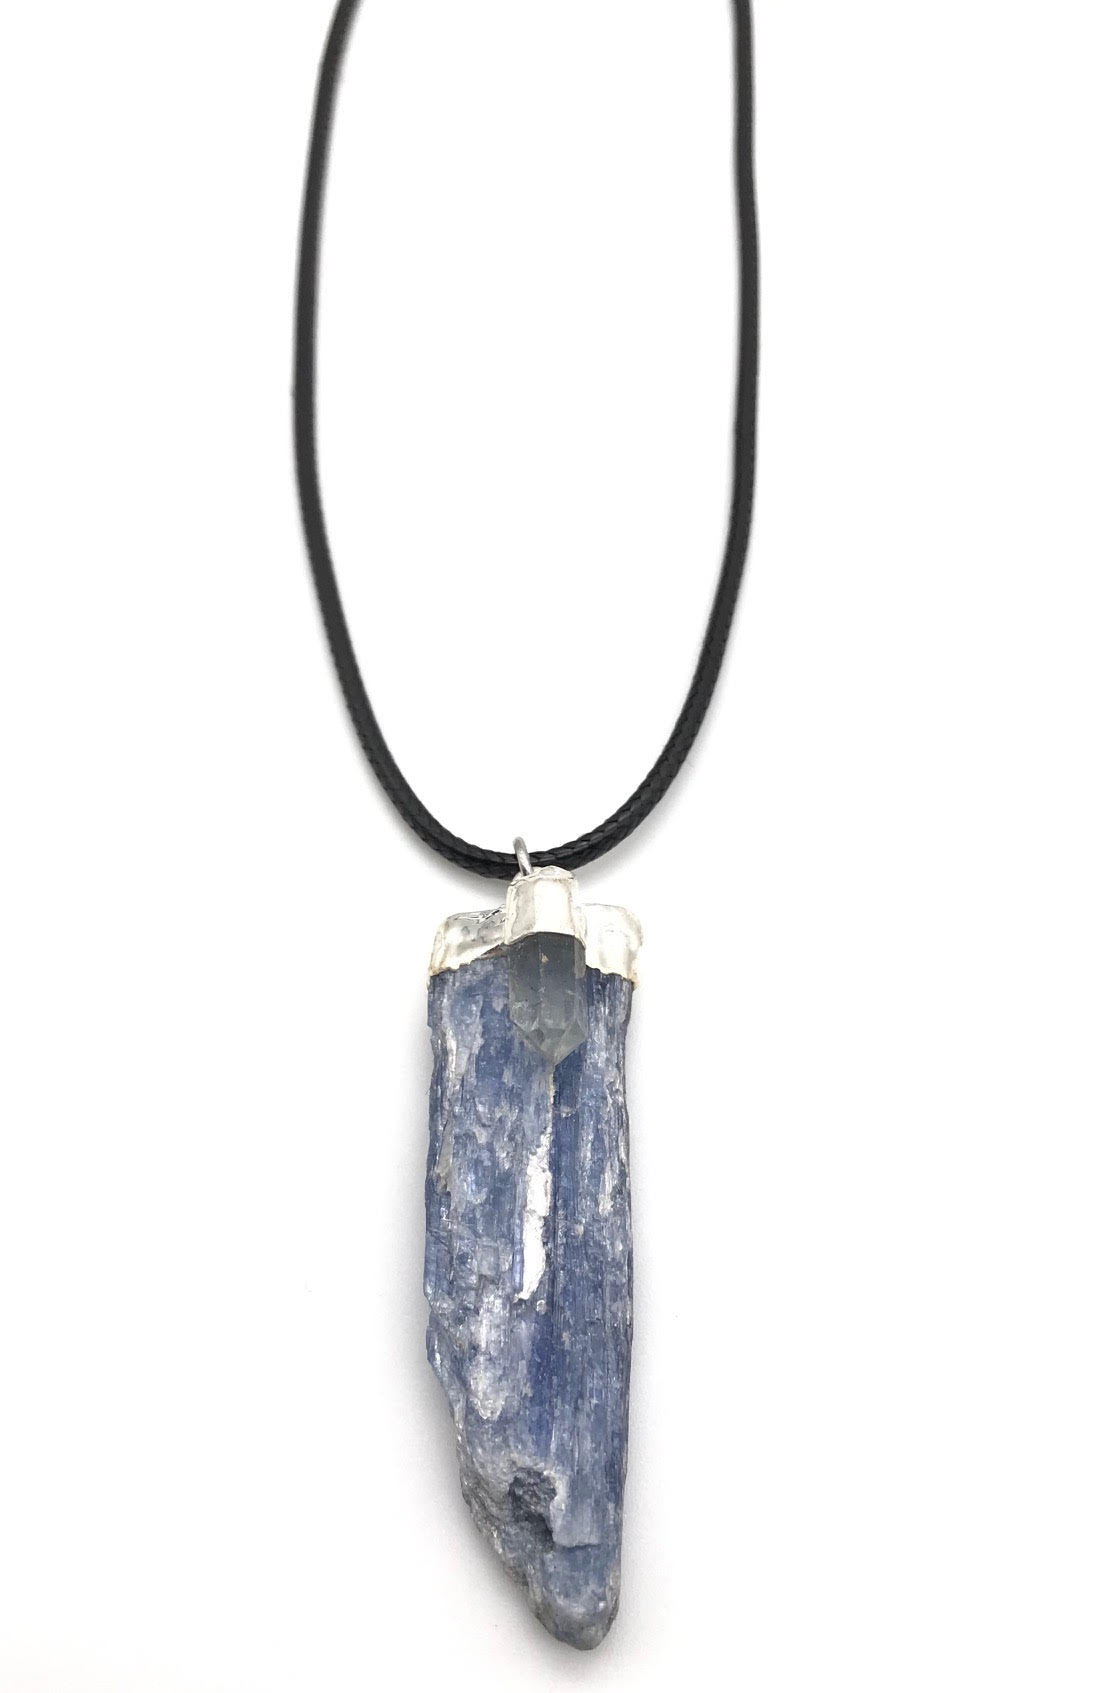 RAW KYANITE AND QUARTZ CRYSTAL HYPOALLERGENIC CORD NECKLACE 16 to 28 INCHES UNISEX